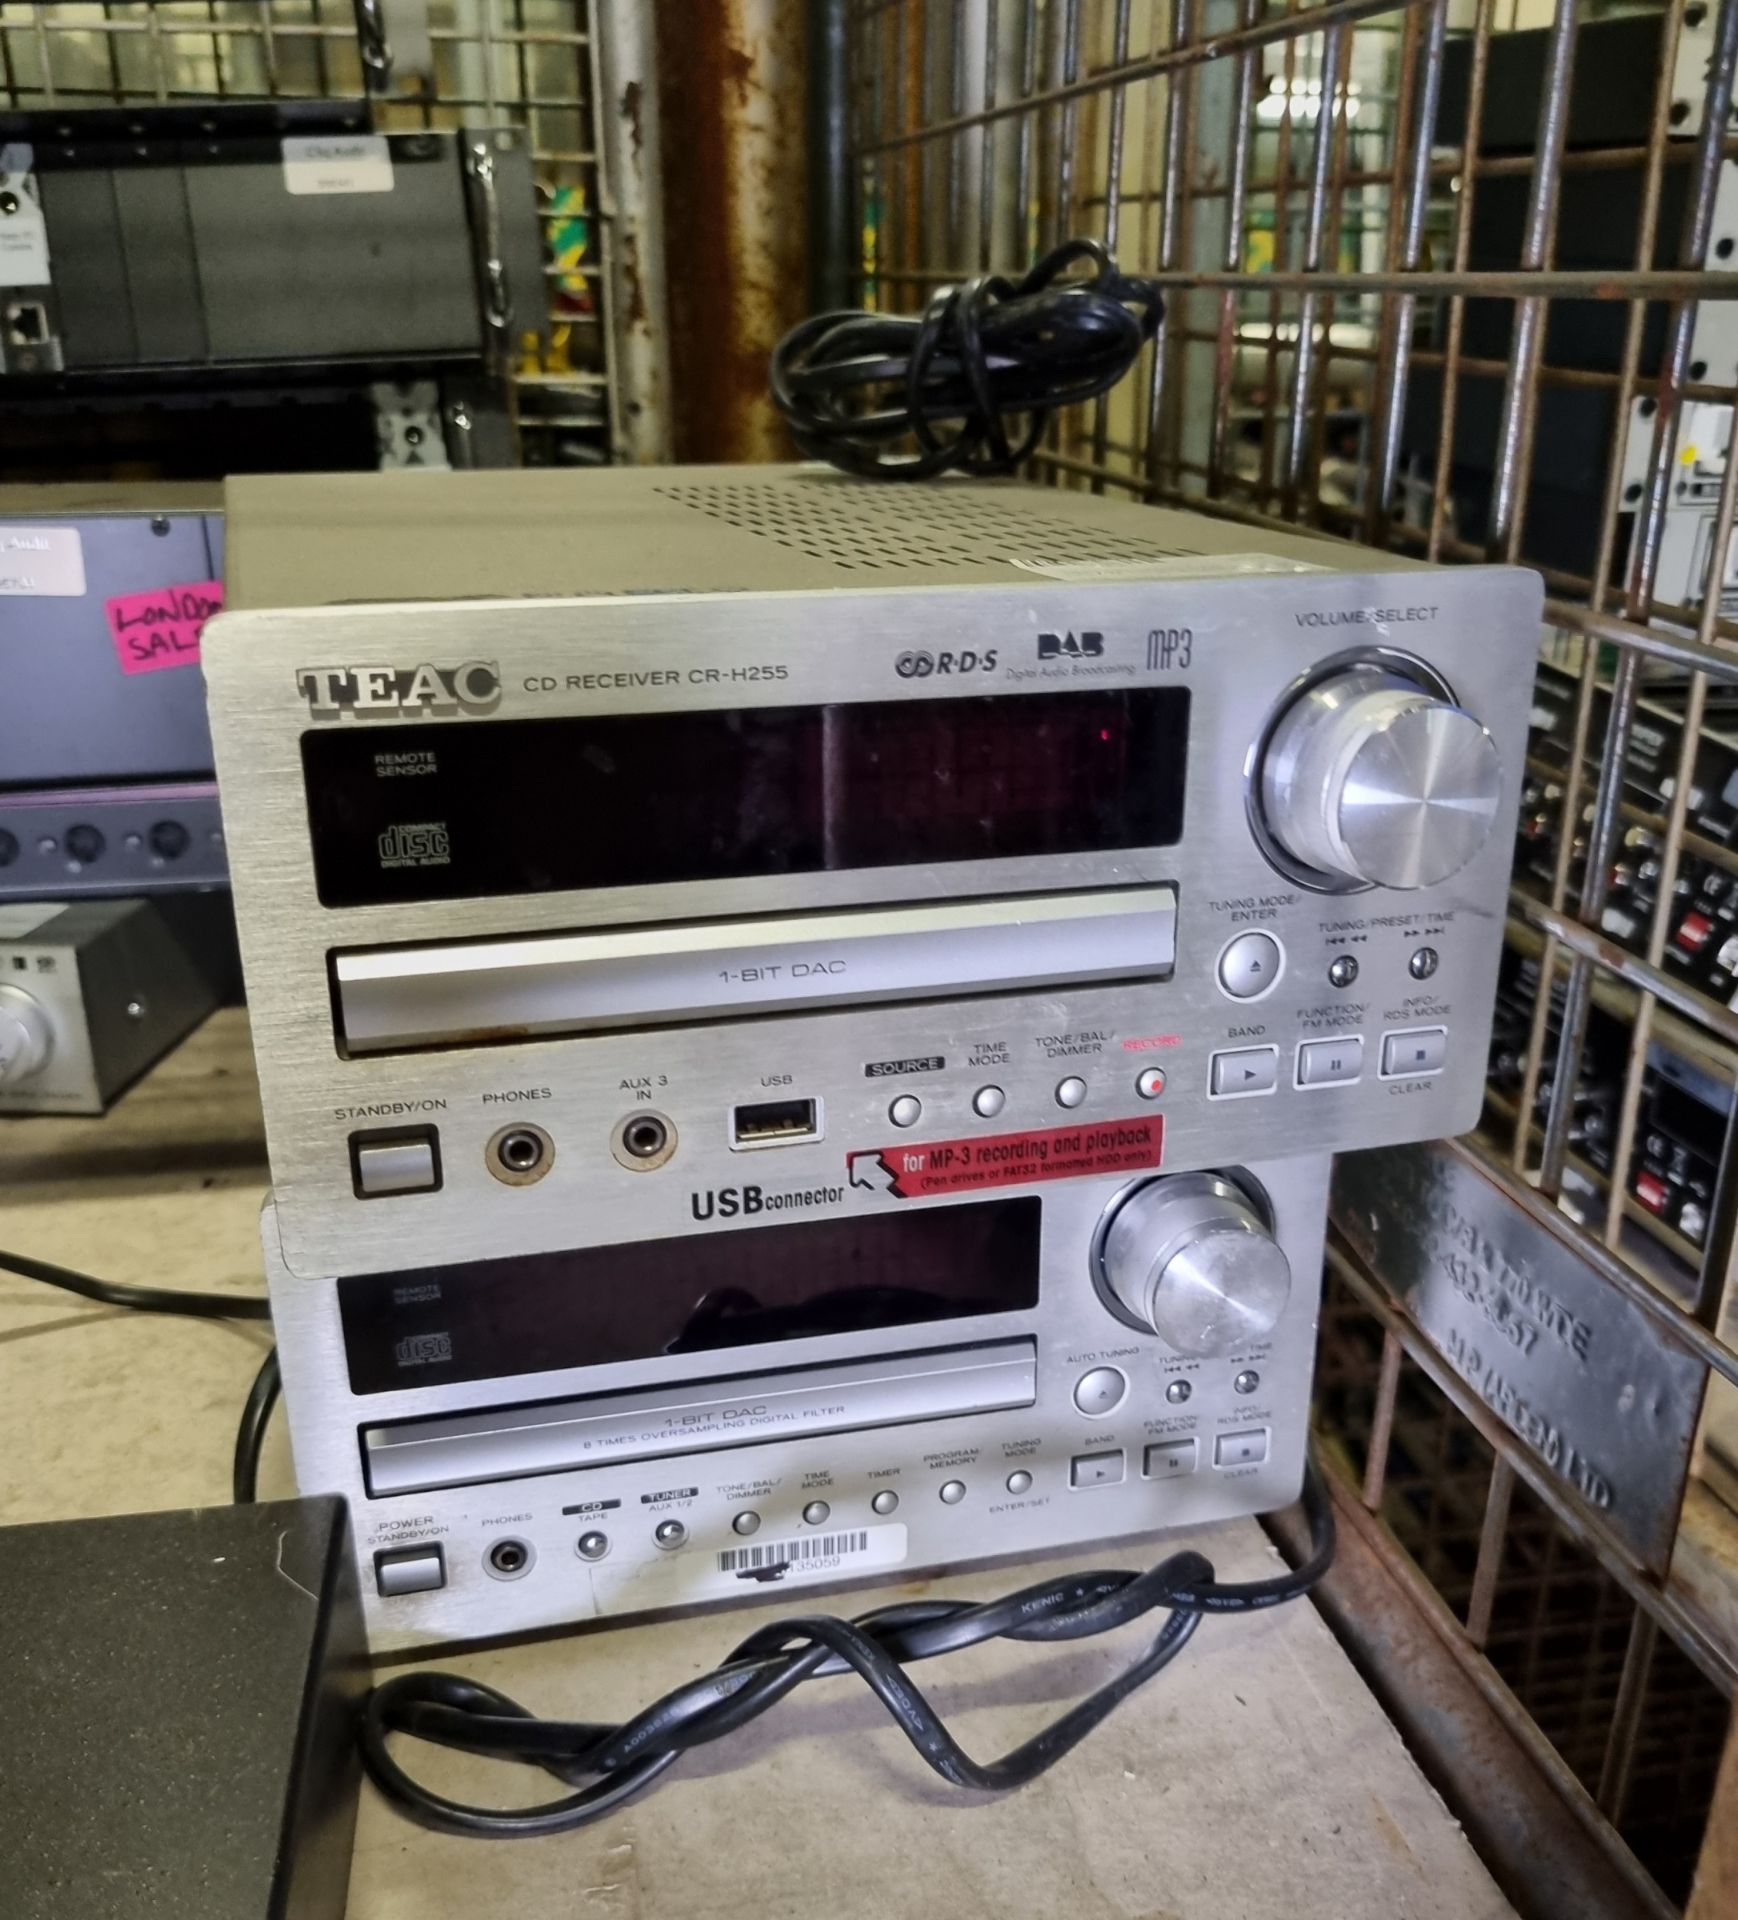 Manual data transfer switch box, Teac CR-H255 DAB receiver CD FM tuner amplifier & more - Image 2 of 6